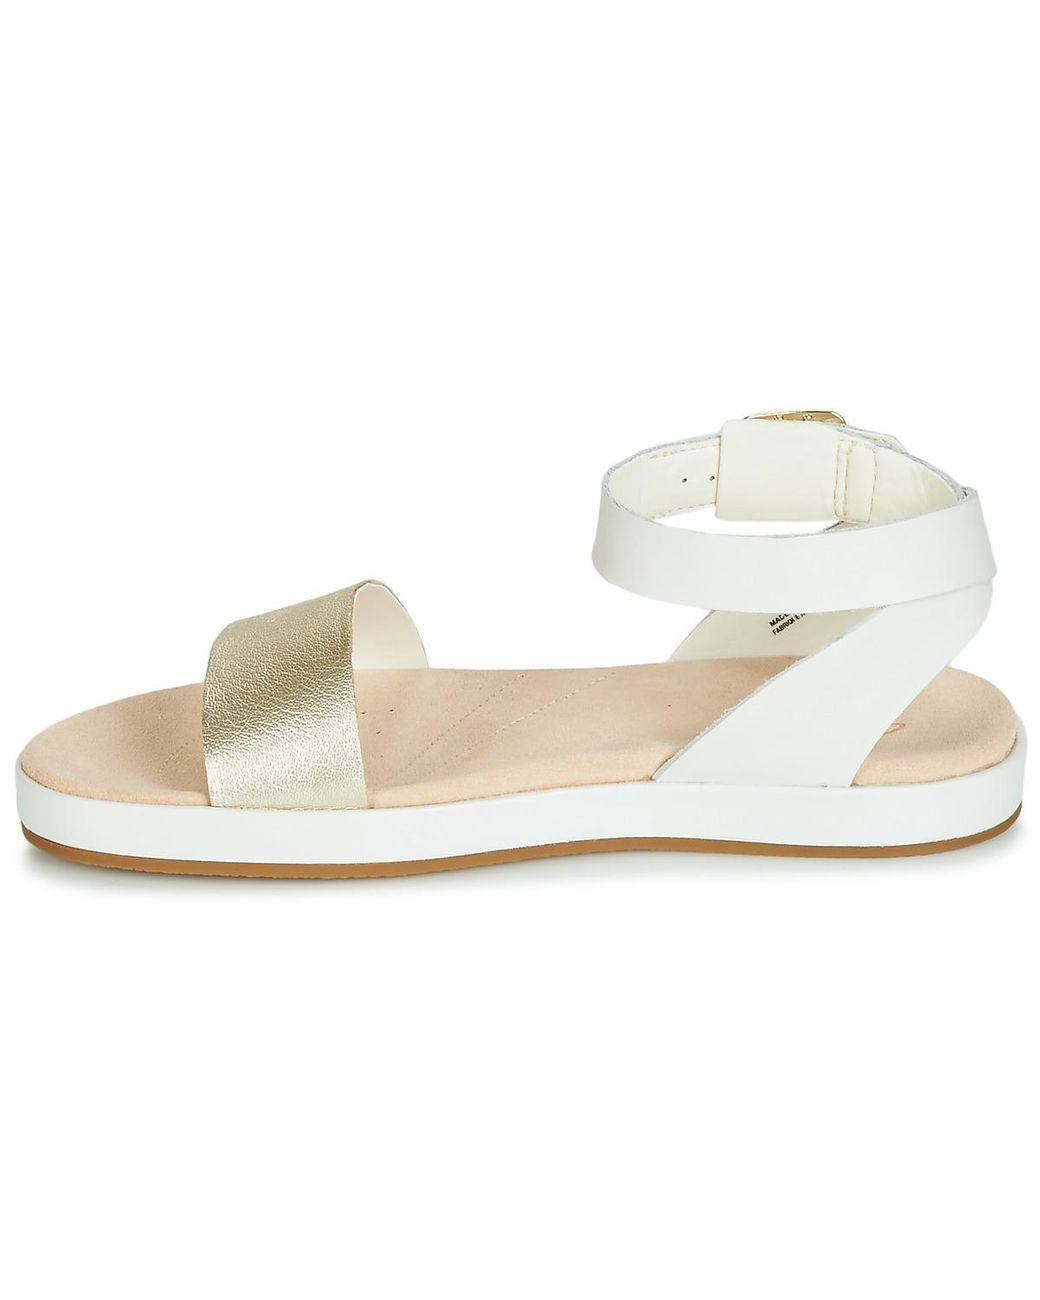 Clarks Leather Botanic Ivy Sandals in White - Save 42% | Lyst UK